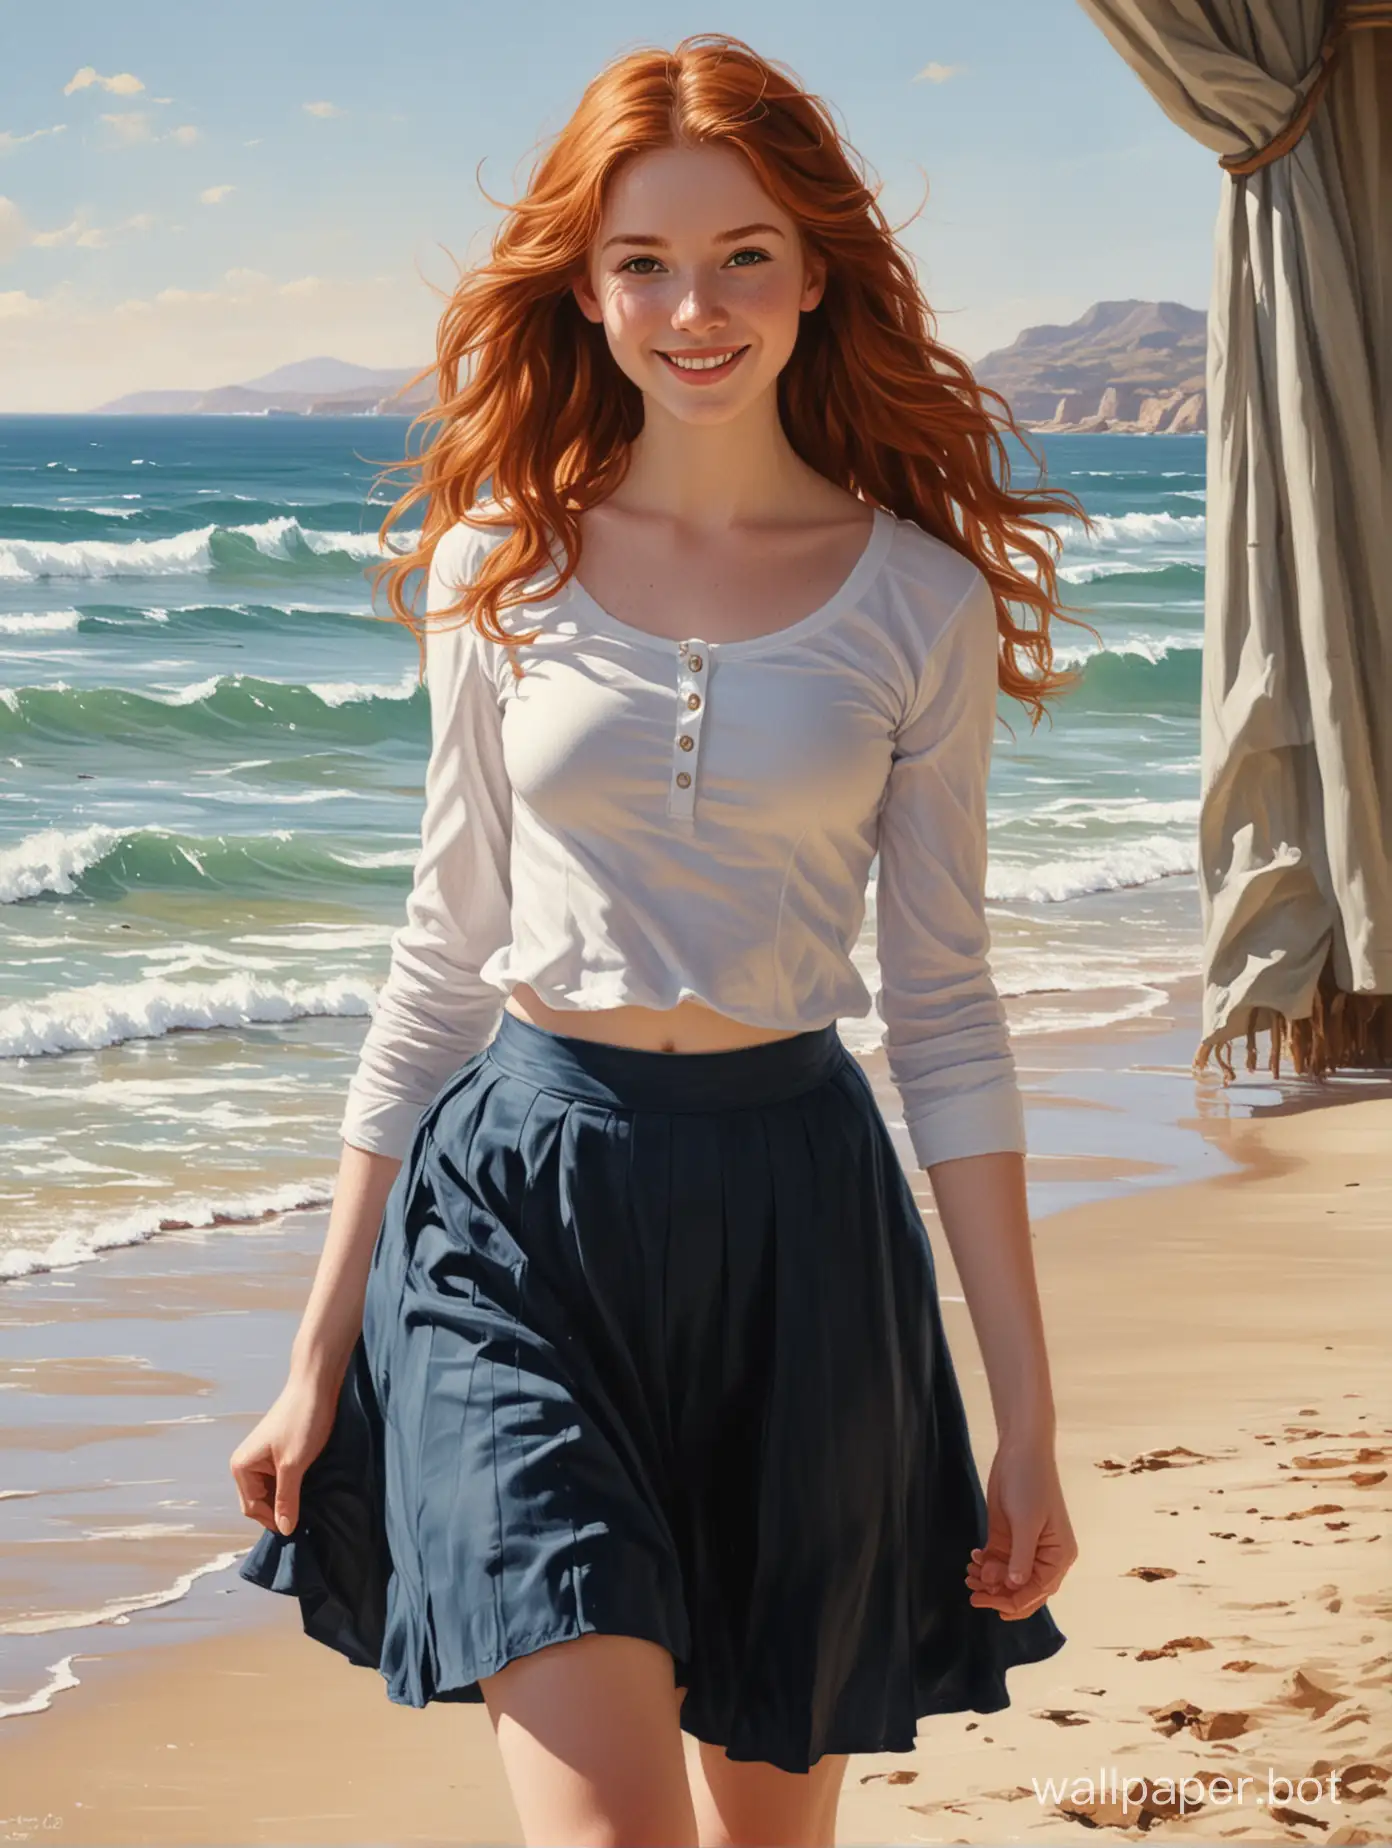 Adorable-Redhead-Teen-with-SixPack-Abs-Walking-on-Beach